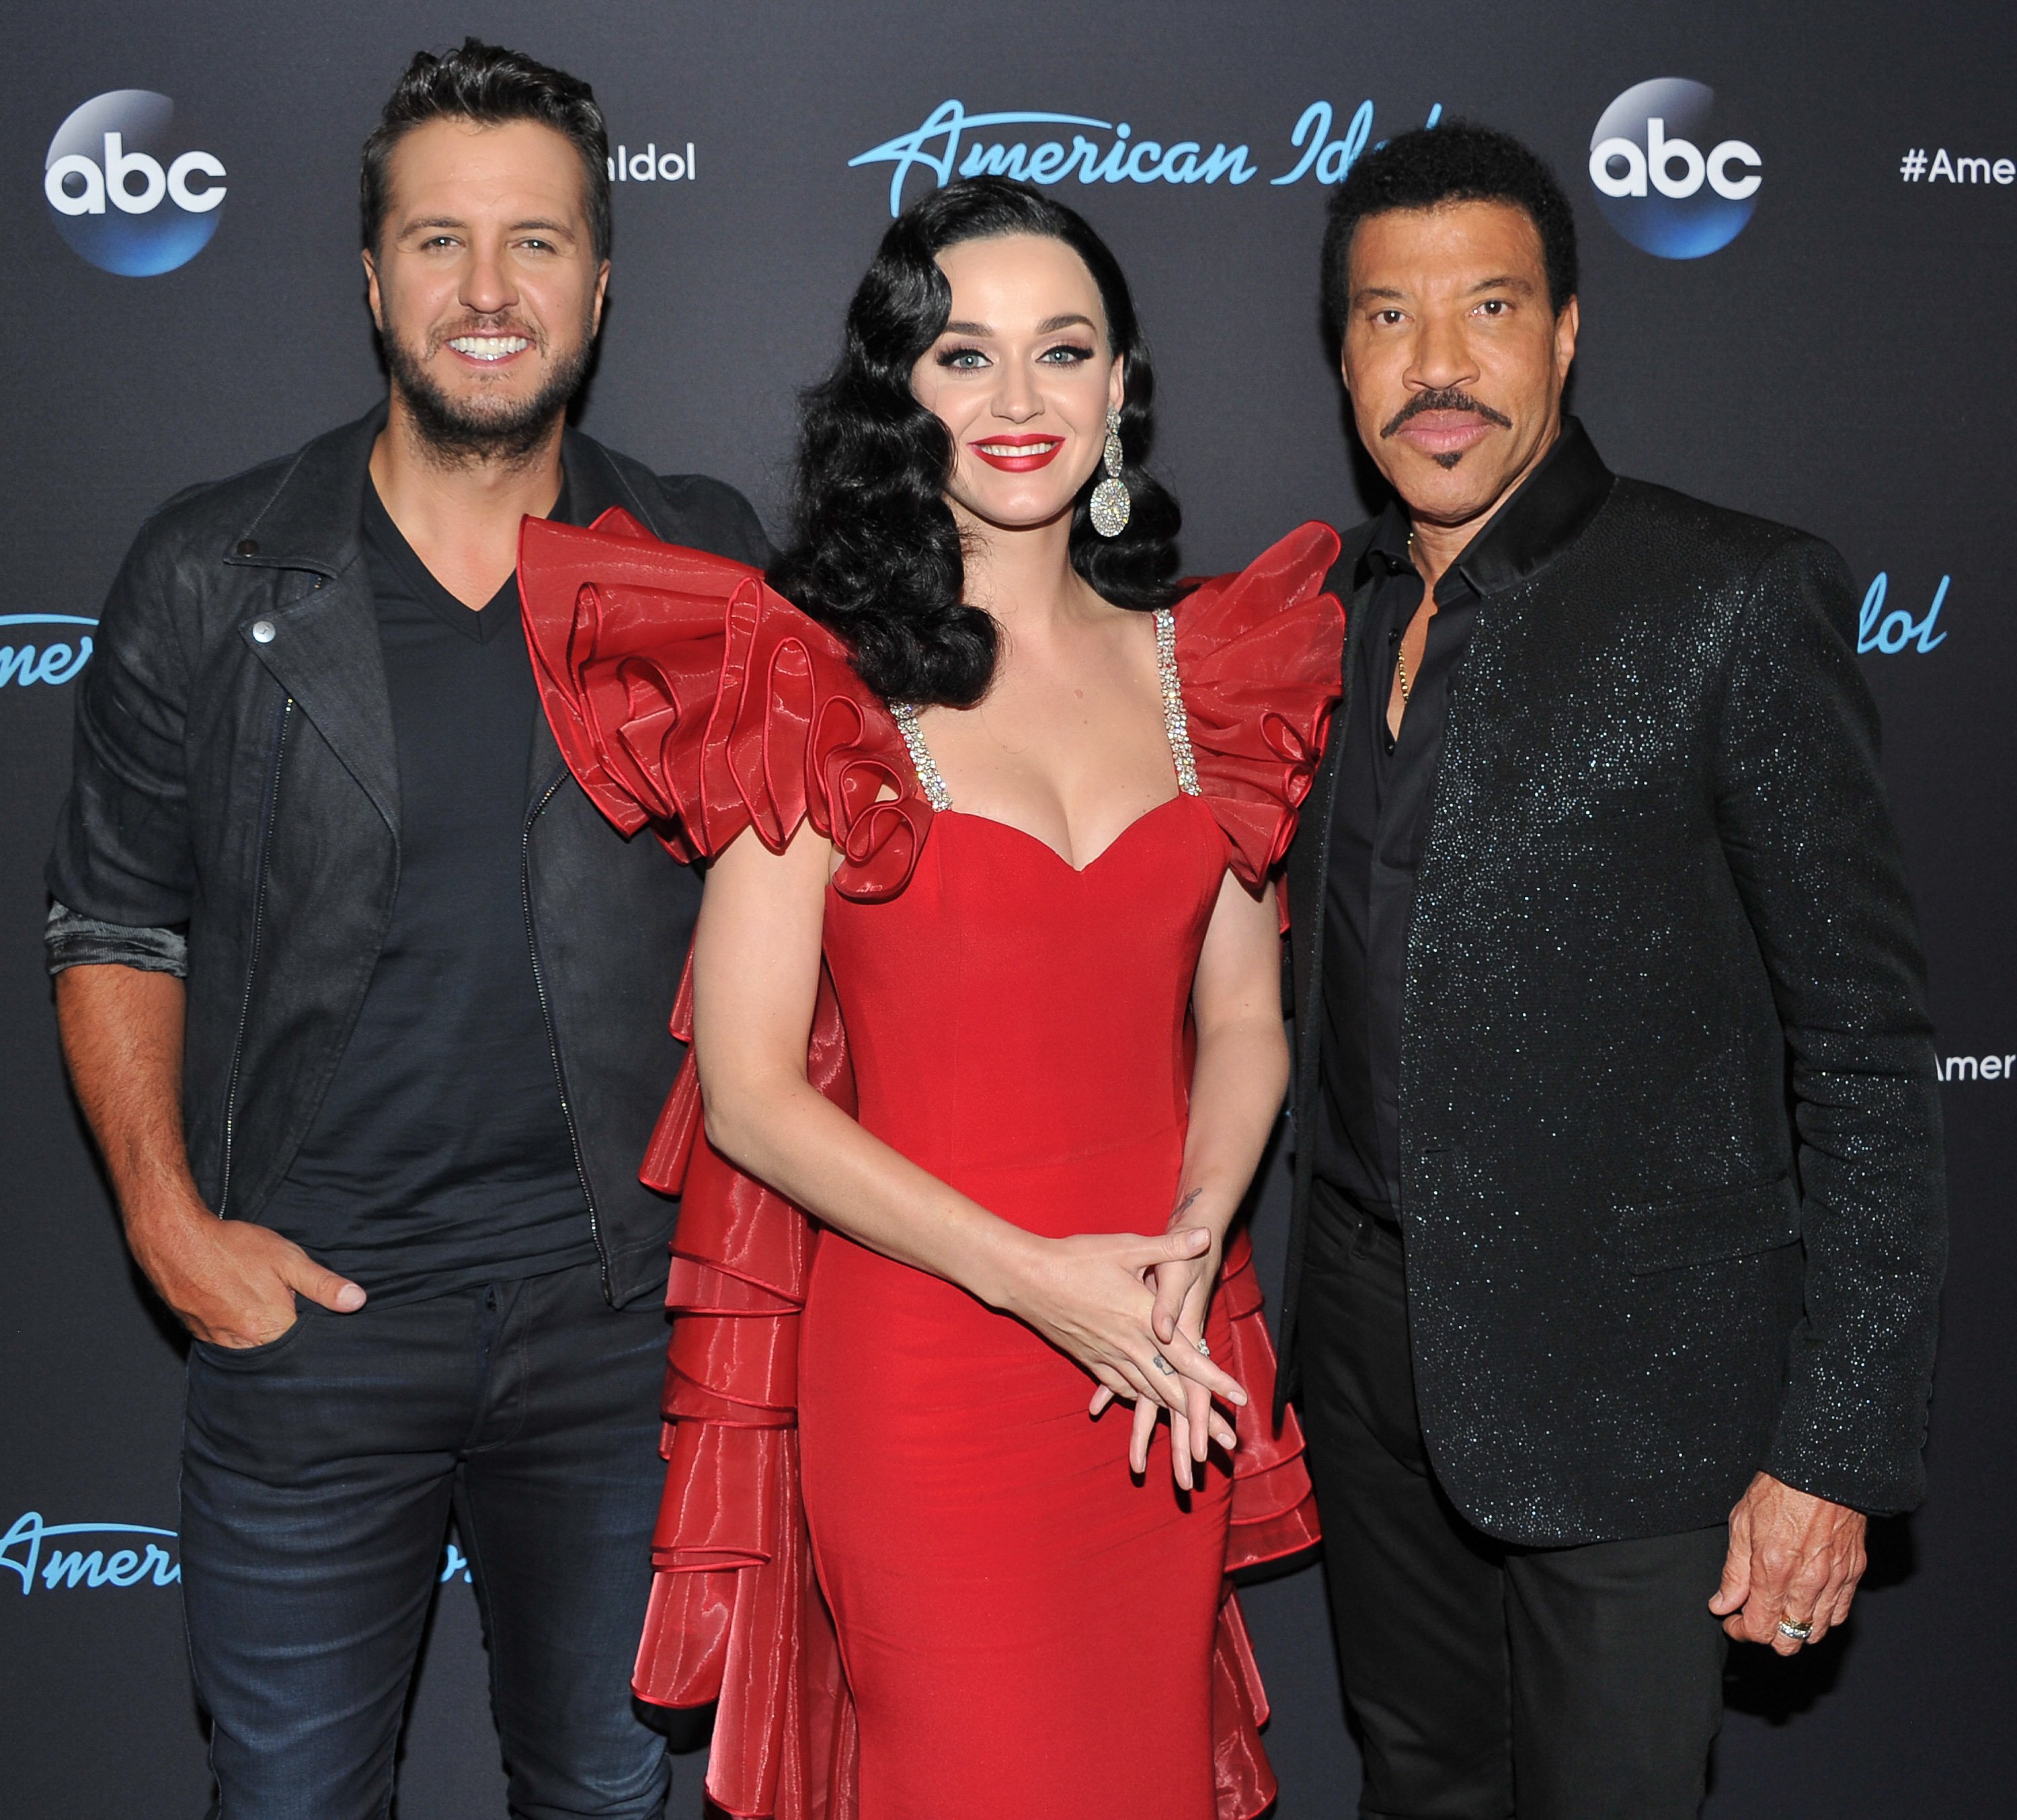 Luke Bryan, Katy Perry and Lionel Richie arrive at ABC's "American Idol" show on May 6, 2018, in Los Angeles, California. | Source: Getty Images.